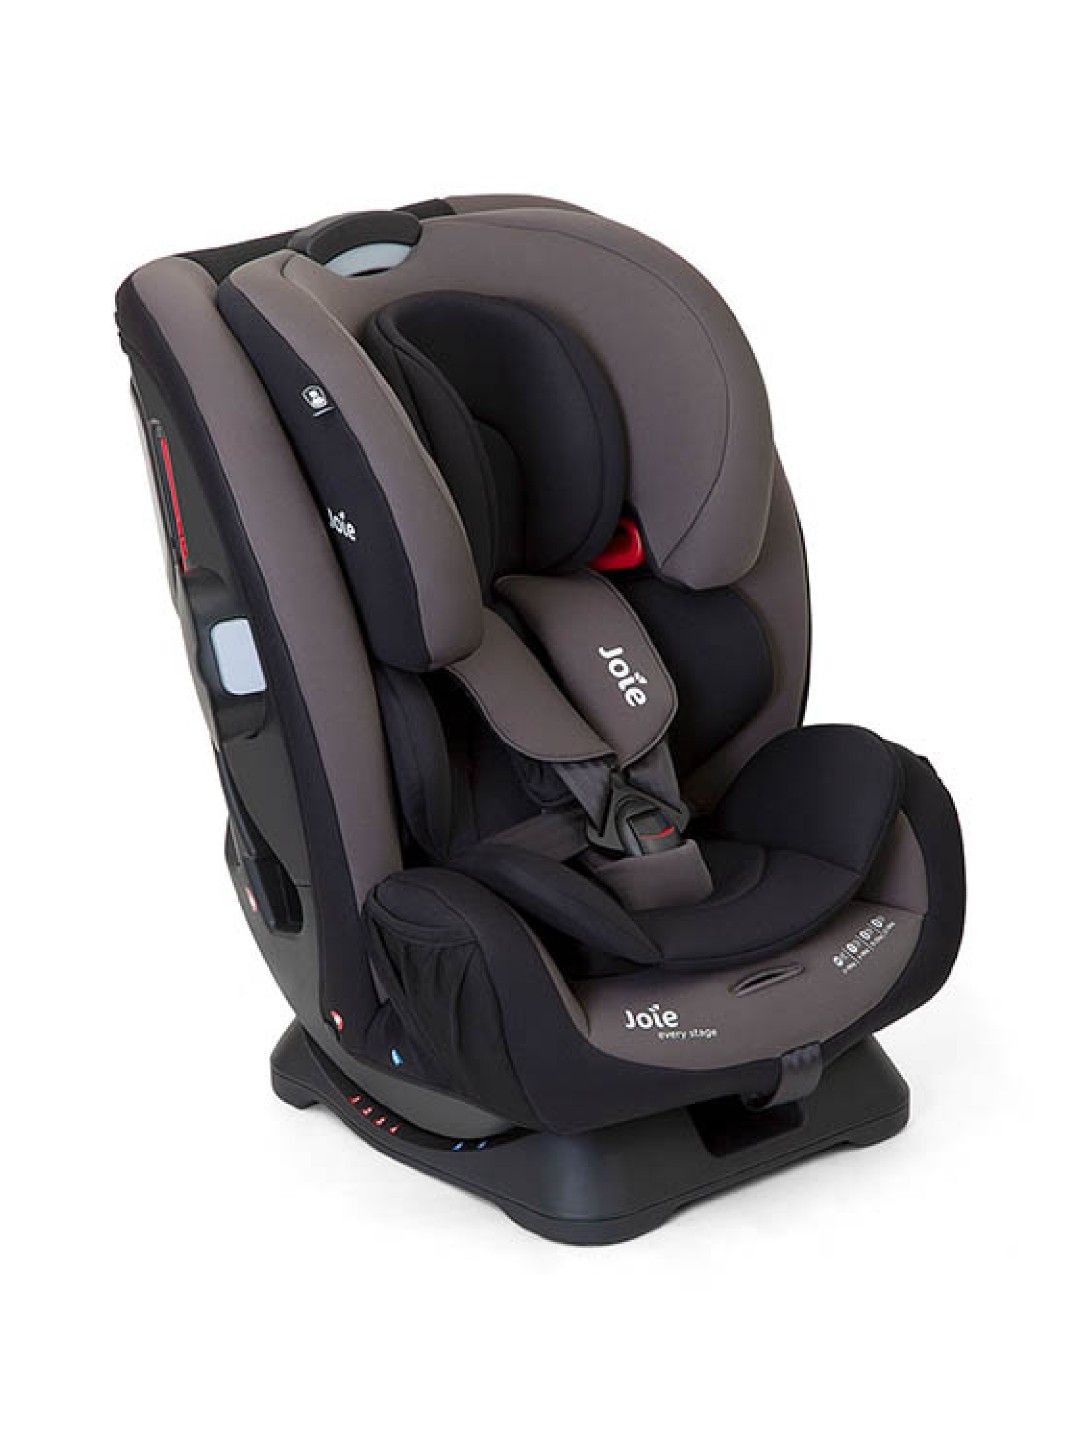 Joie Every Stage Car Seat Group 0+/1/2/3